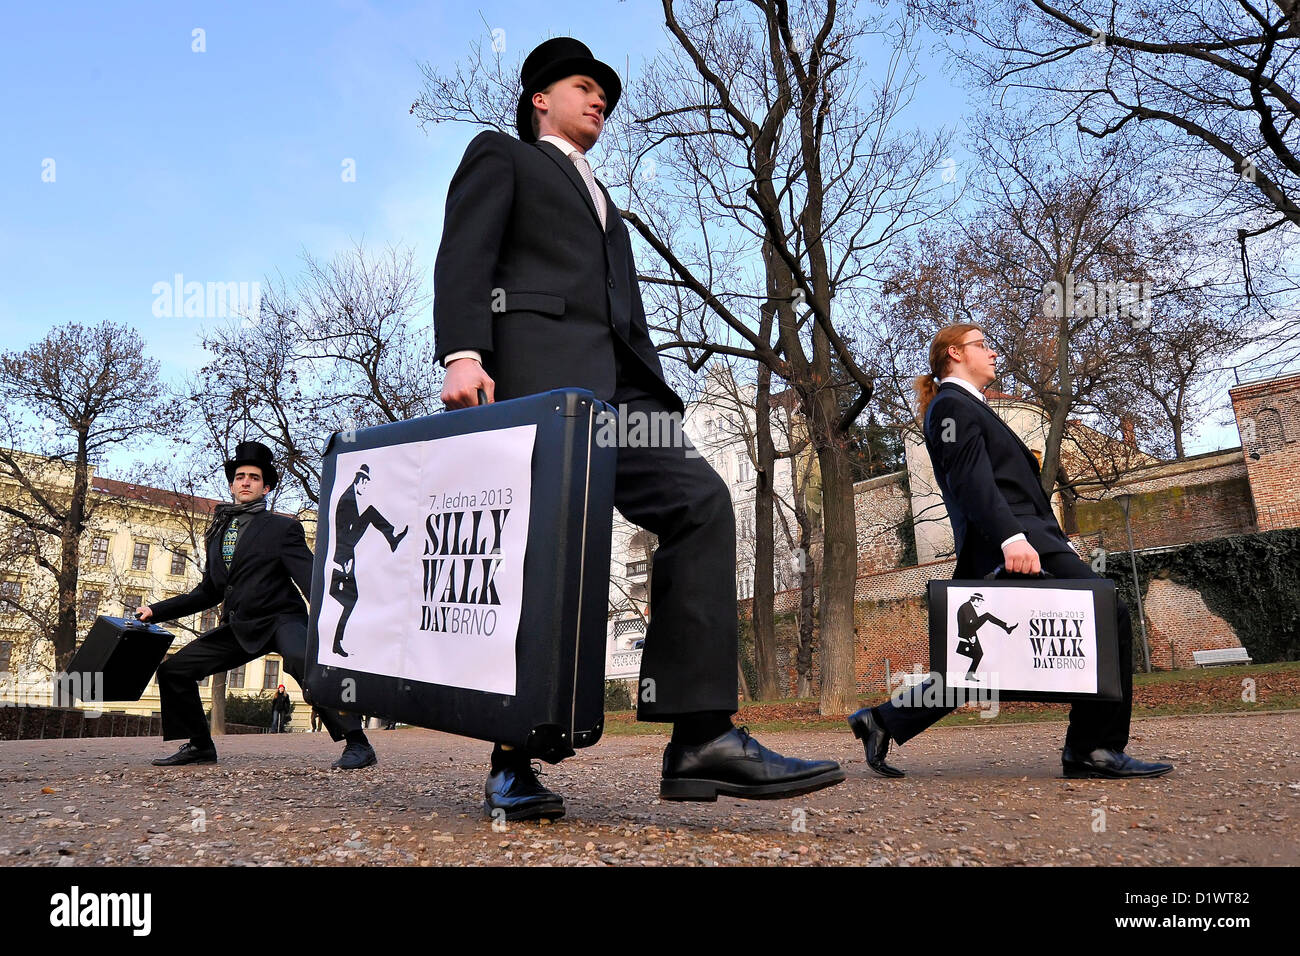 Fans of the British comedy group Monty Python are seen during unusual march  on the occasion of the International Silly Walk Day in Brno, Czech  Republic, January 7, 2012. (CTK Photo/Vaclav Salek